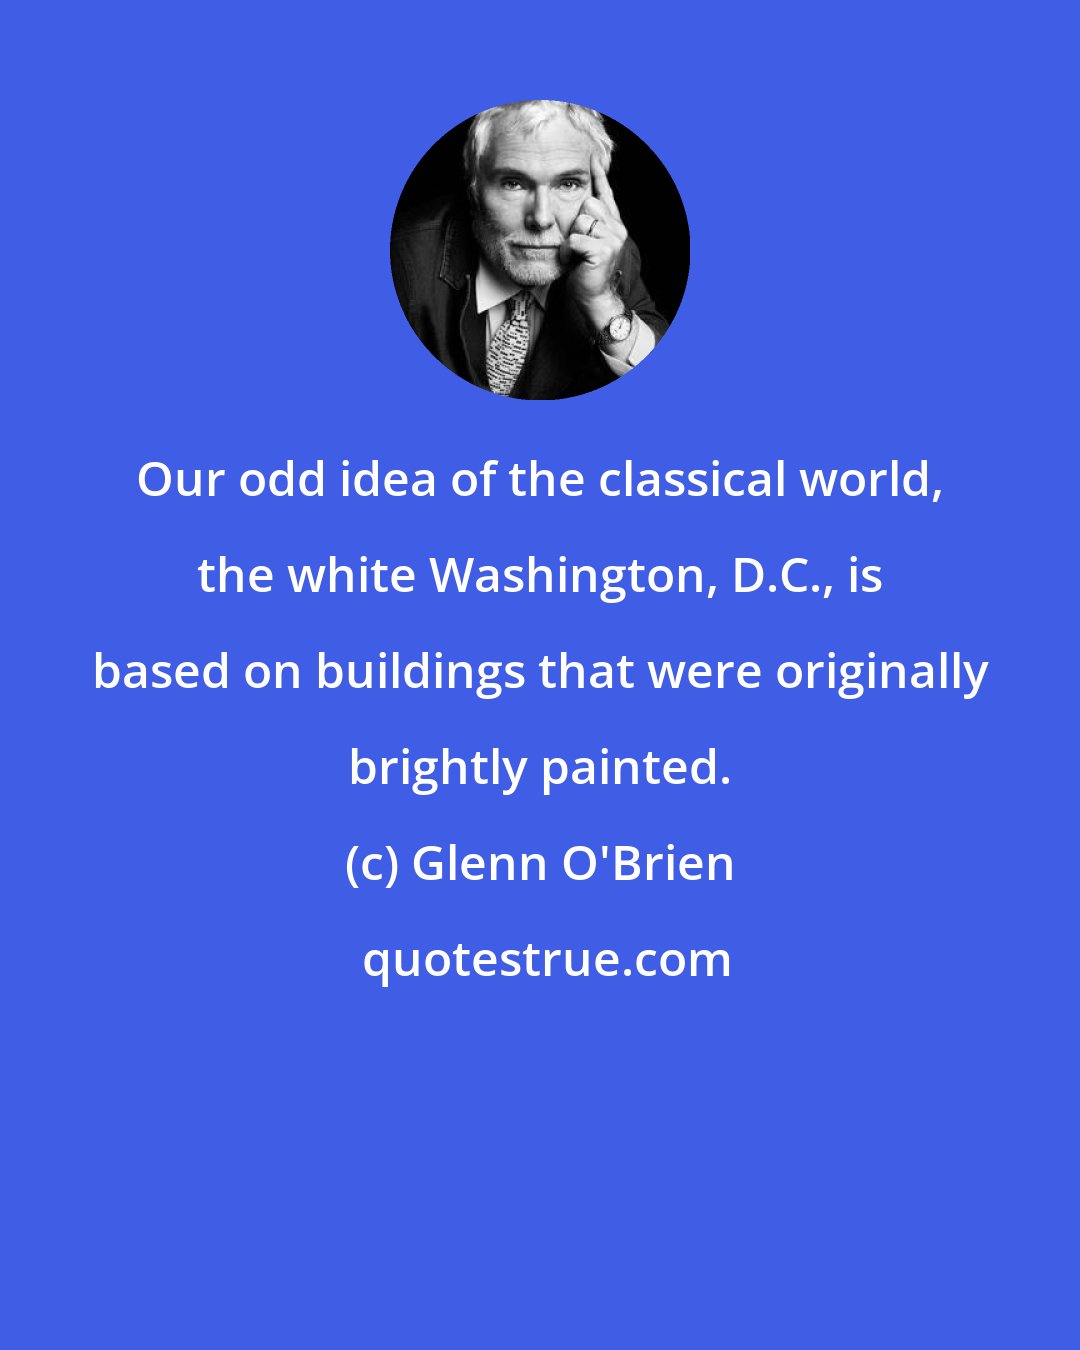 Glenn O'Brien: Our odd idea of the classical world, the white Washington, D.C., is based on buildings that were originally brightly painted.